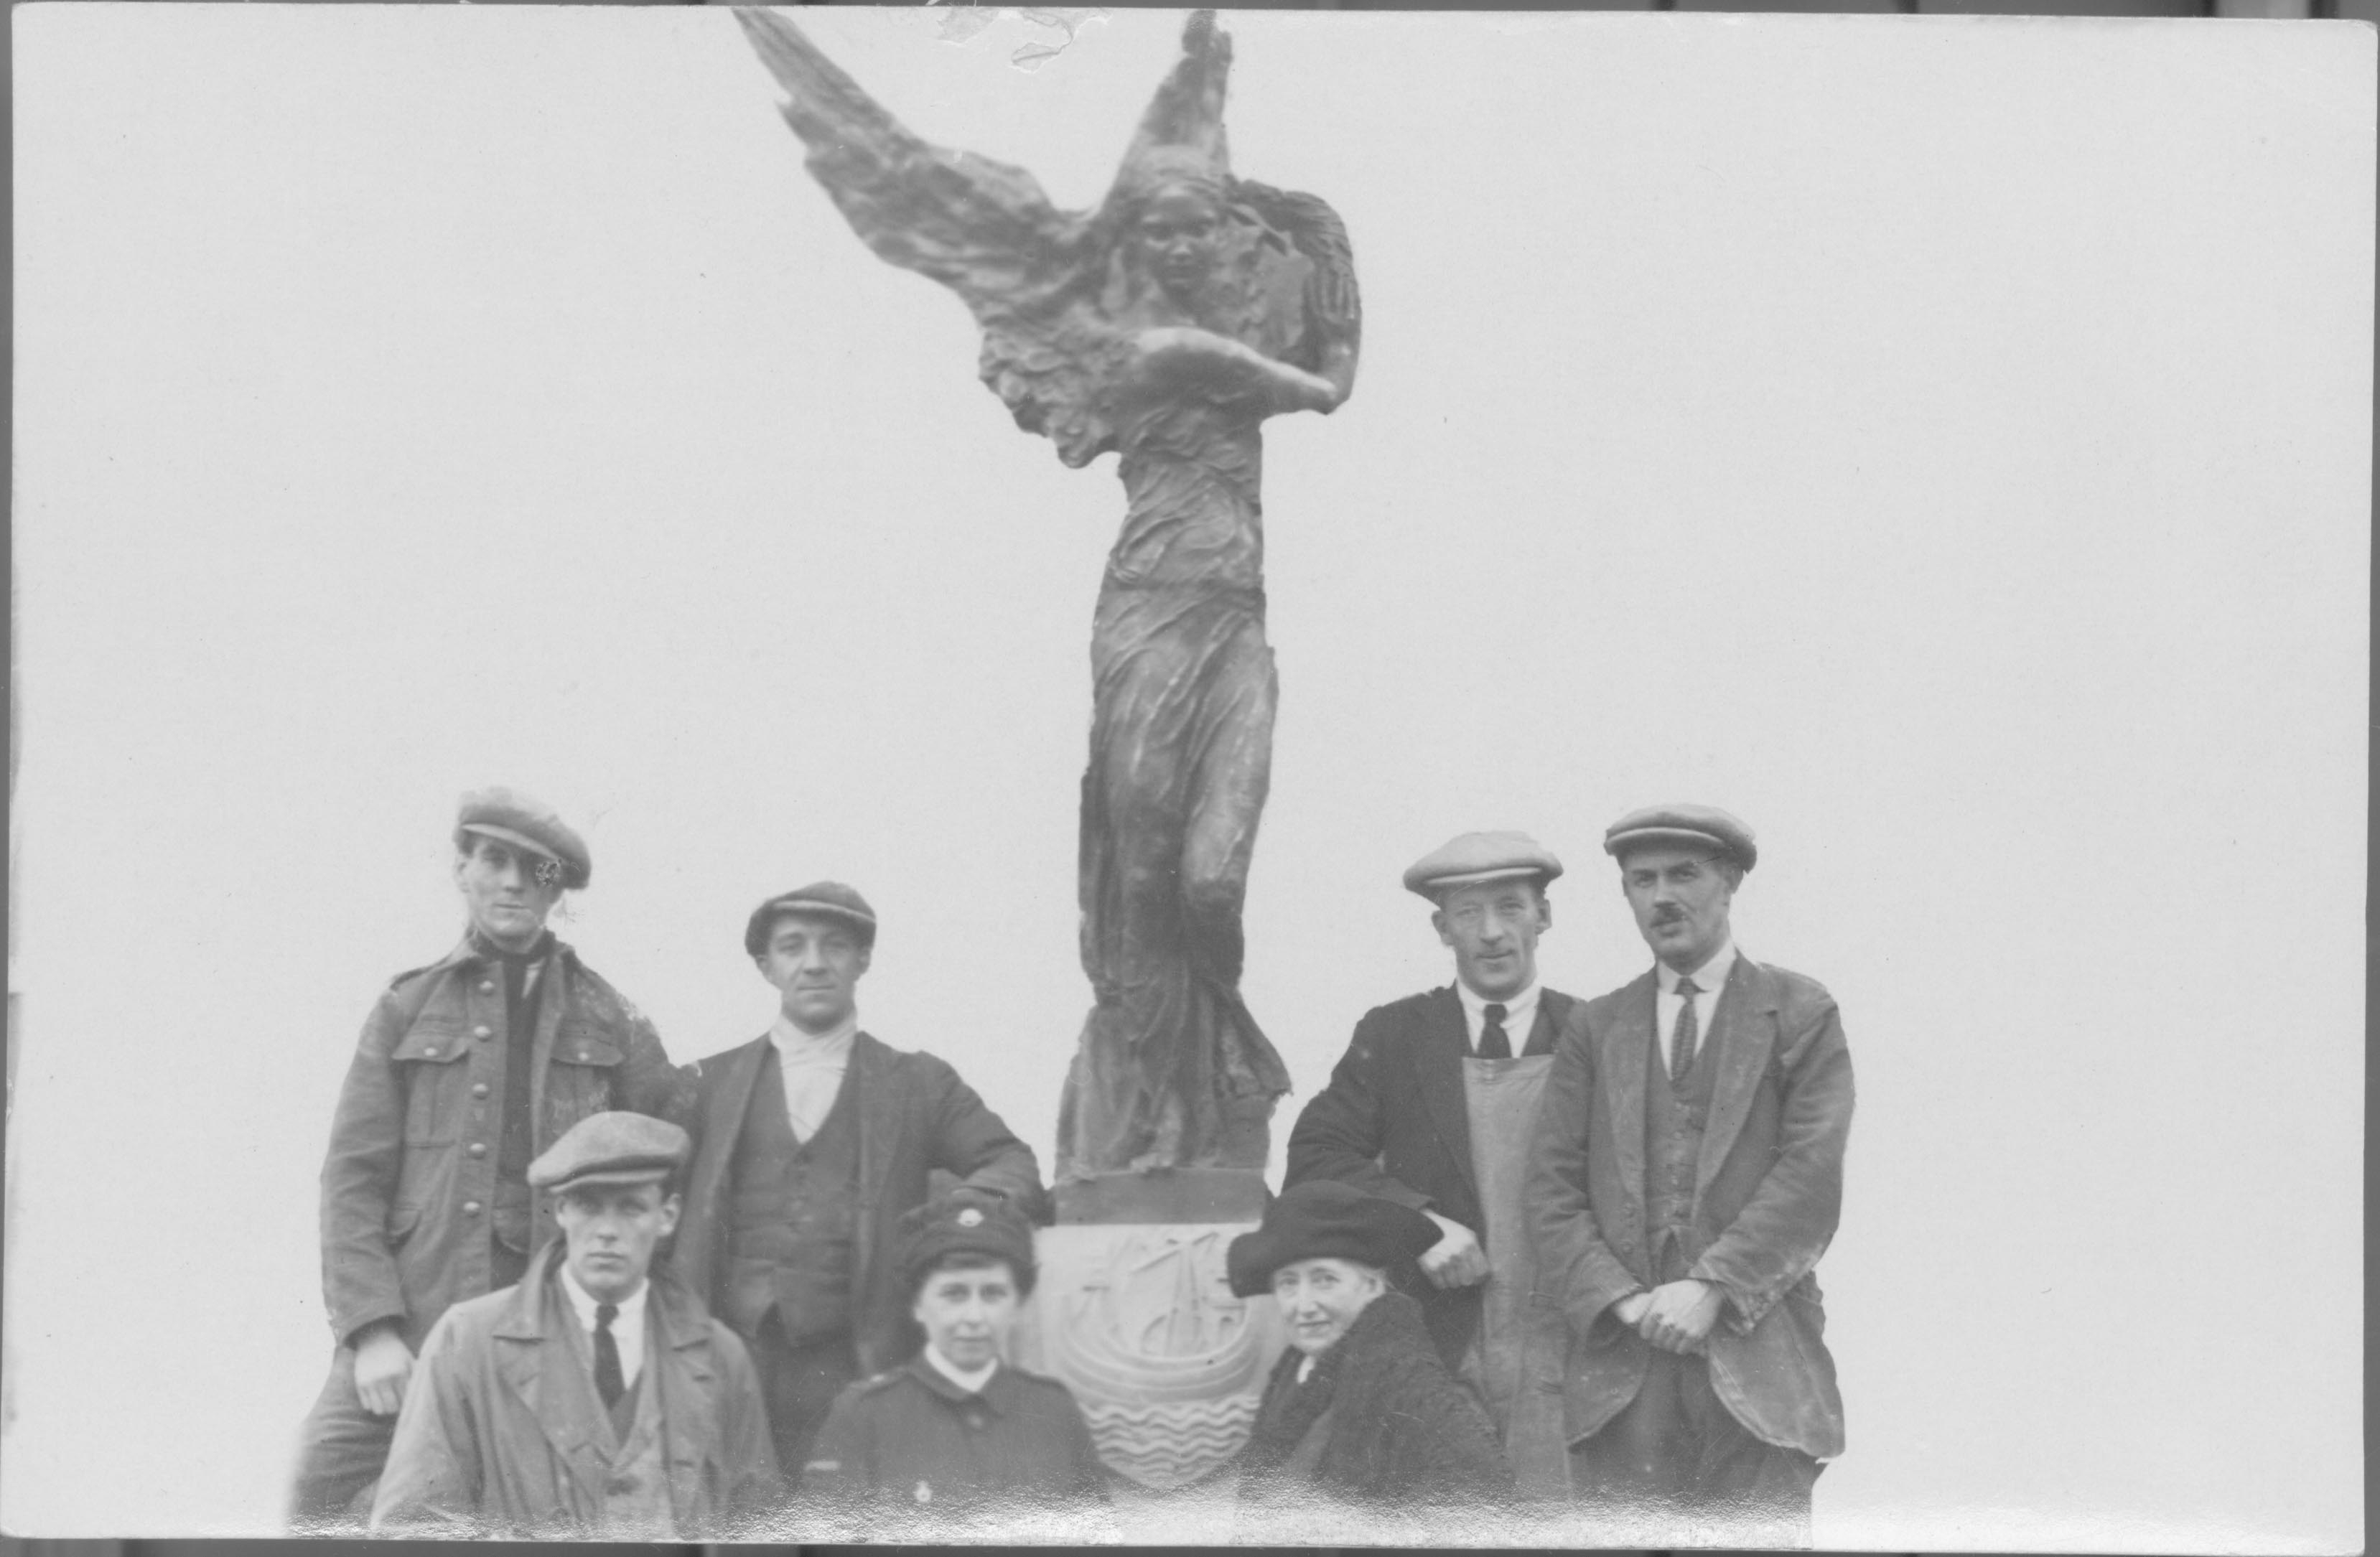 Miss Winser and some of the others involved in the Alexandra Park commission pictured with the sculpture